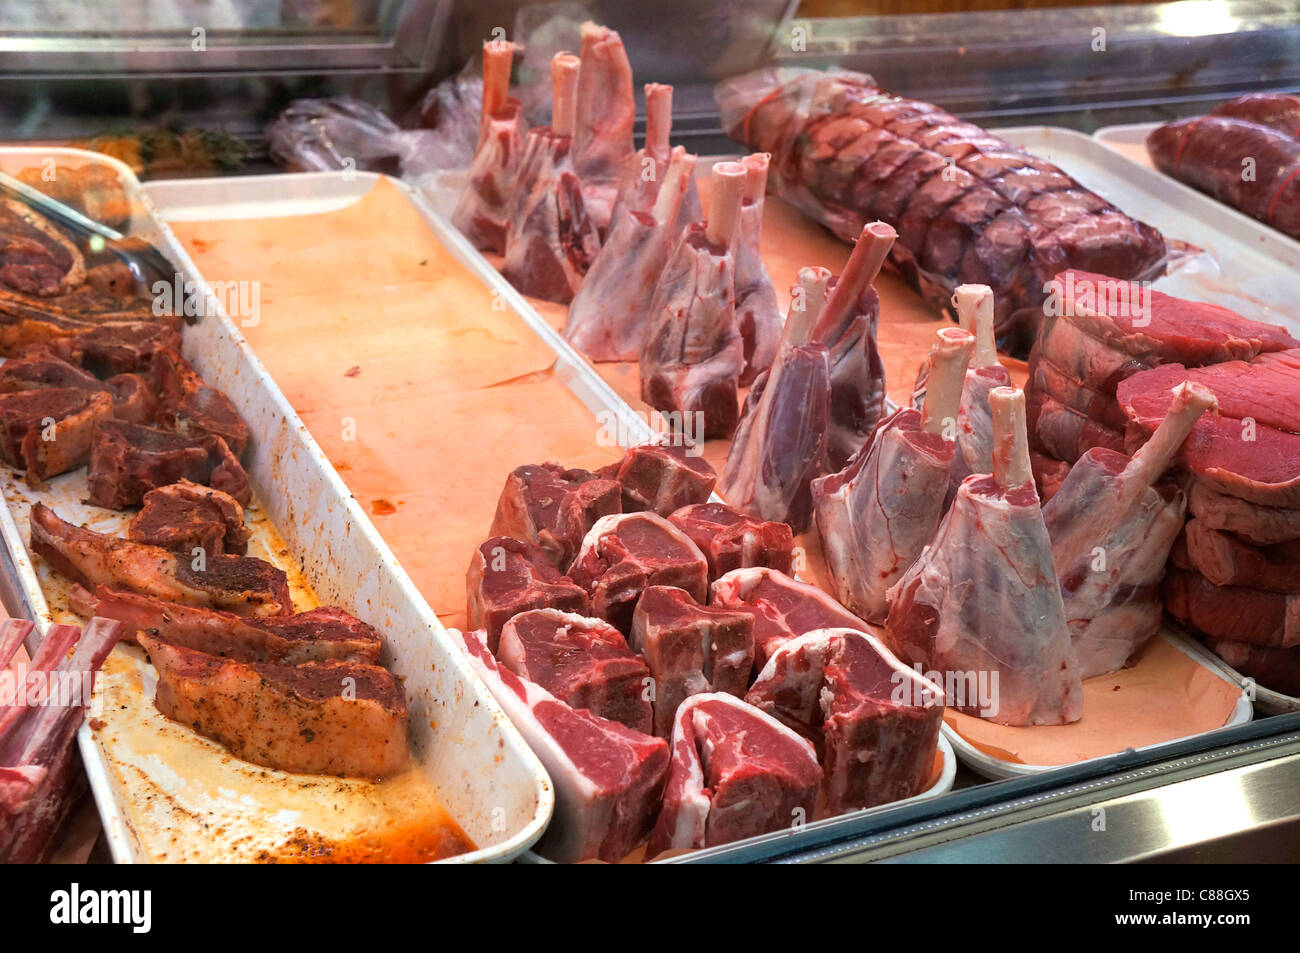 Cuts of Meat Stock Photo